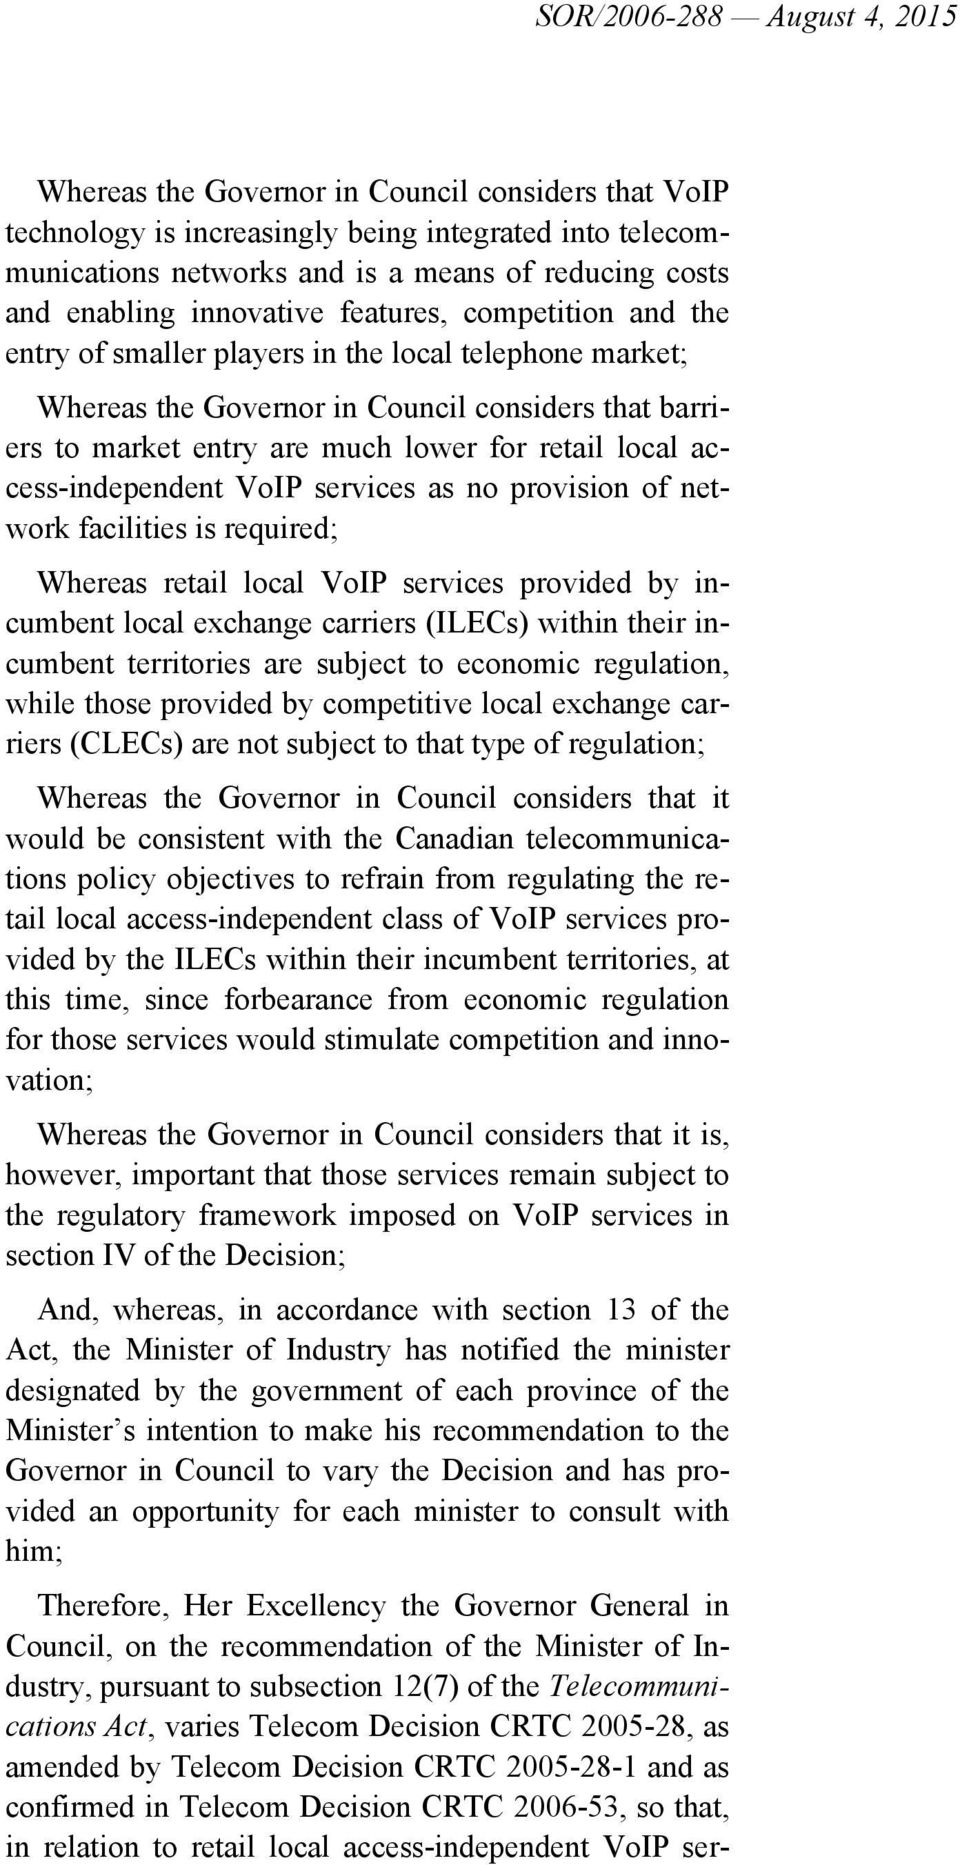 retail local access-independent VoIP services as no provision of network facilities is required; Whereas retail local VoIP services provided by incumbent local exchange carriers (ILECs) within their